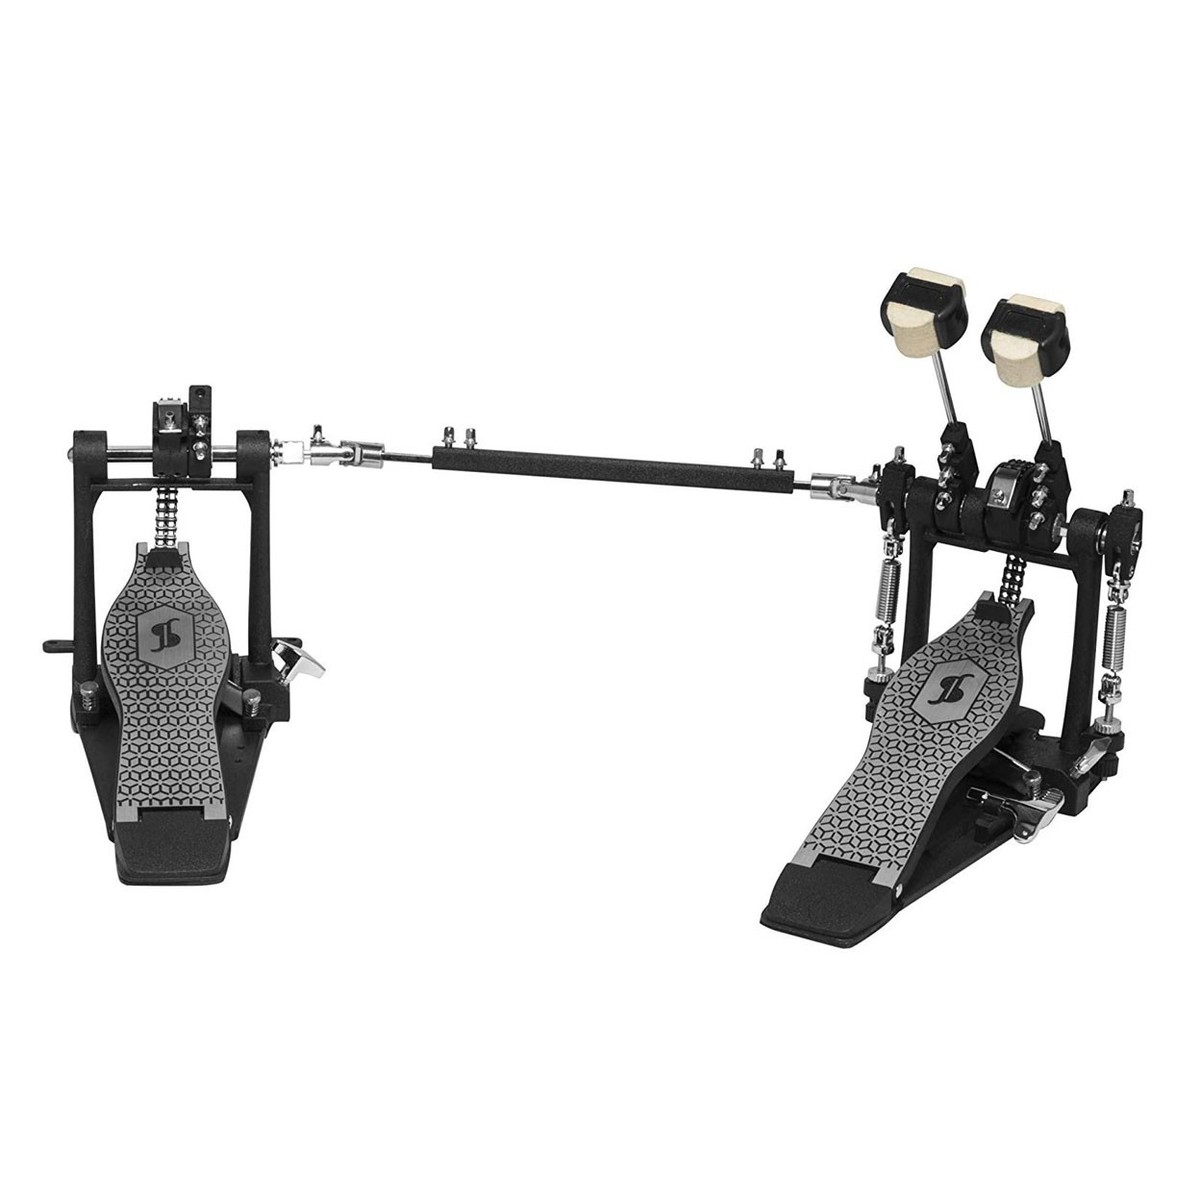 Stagg PPD-52 Double Drum Pedal